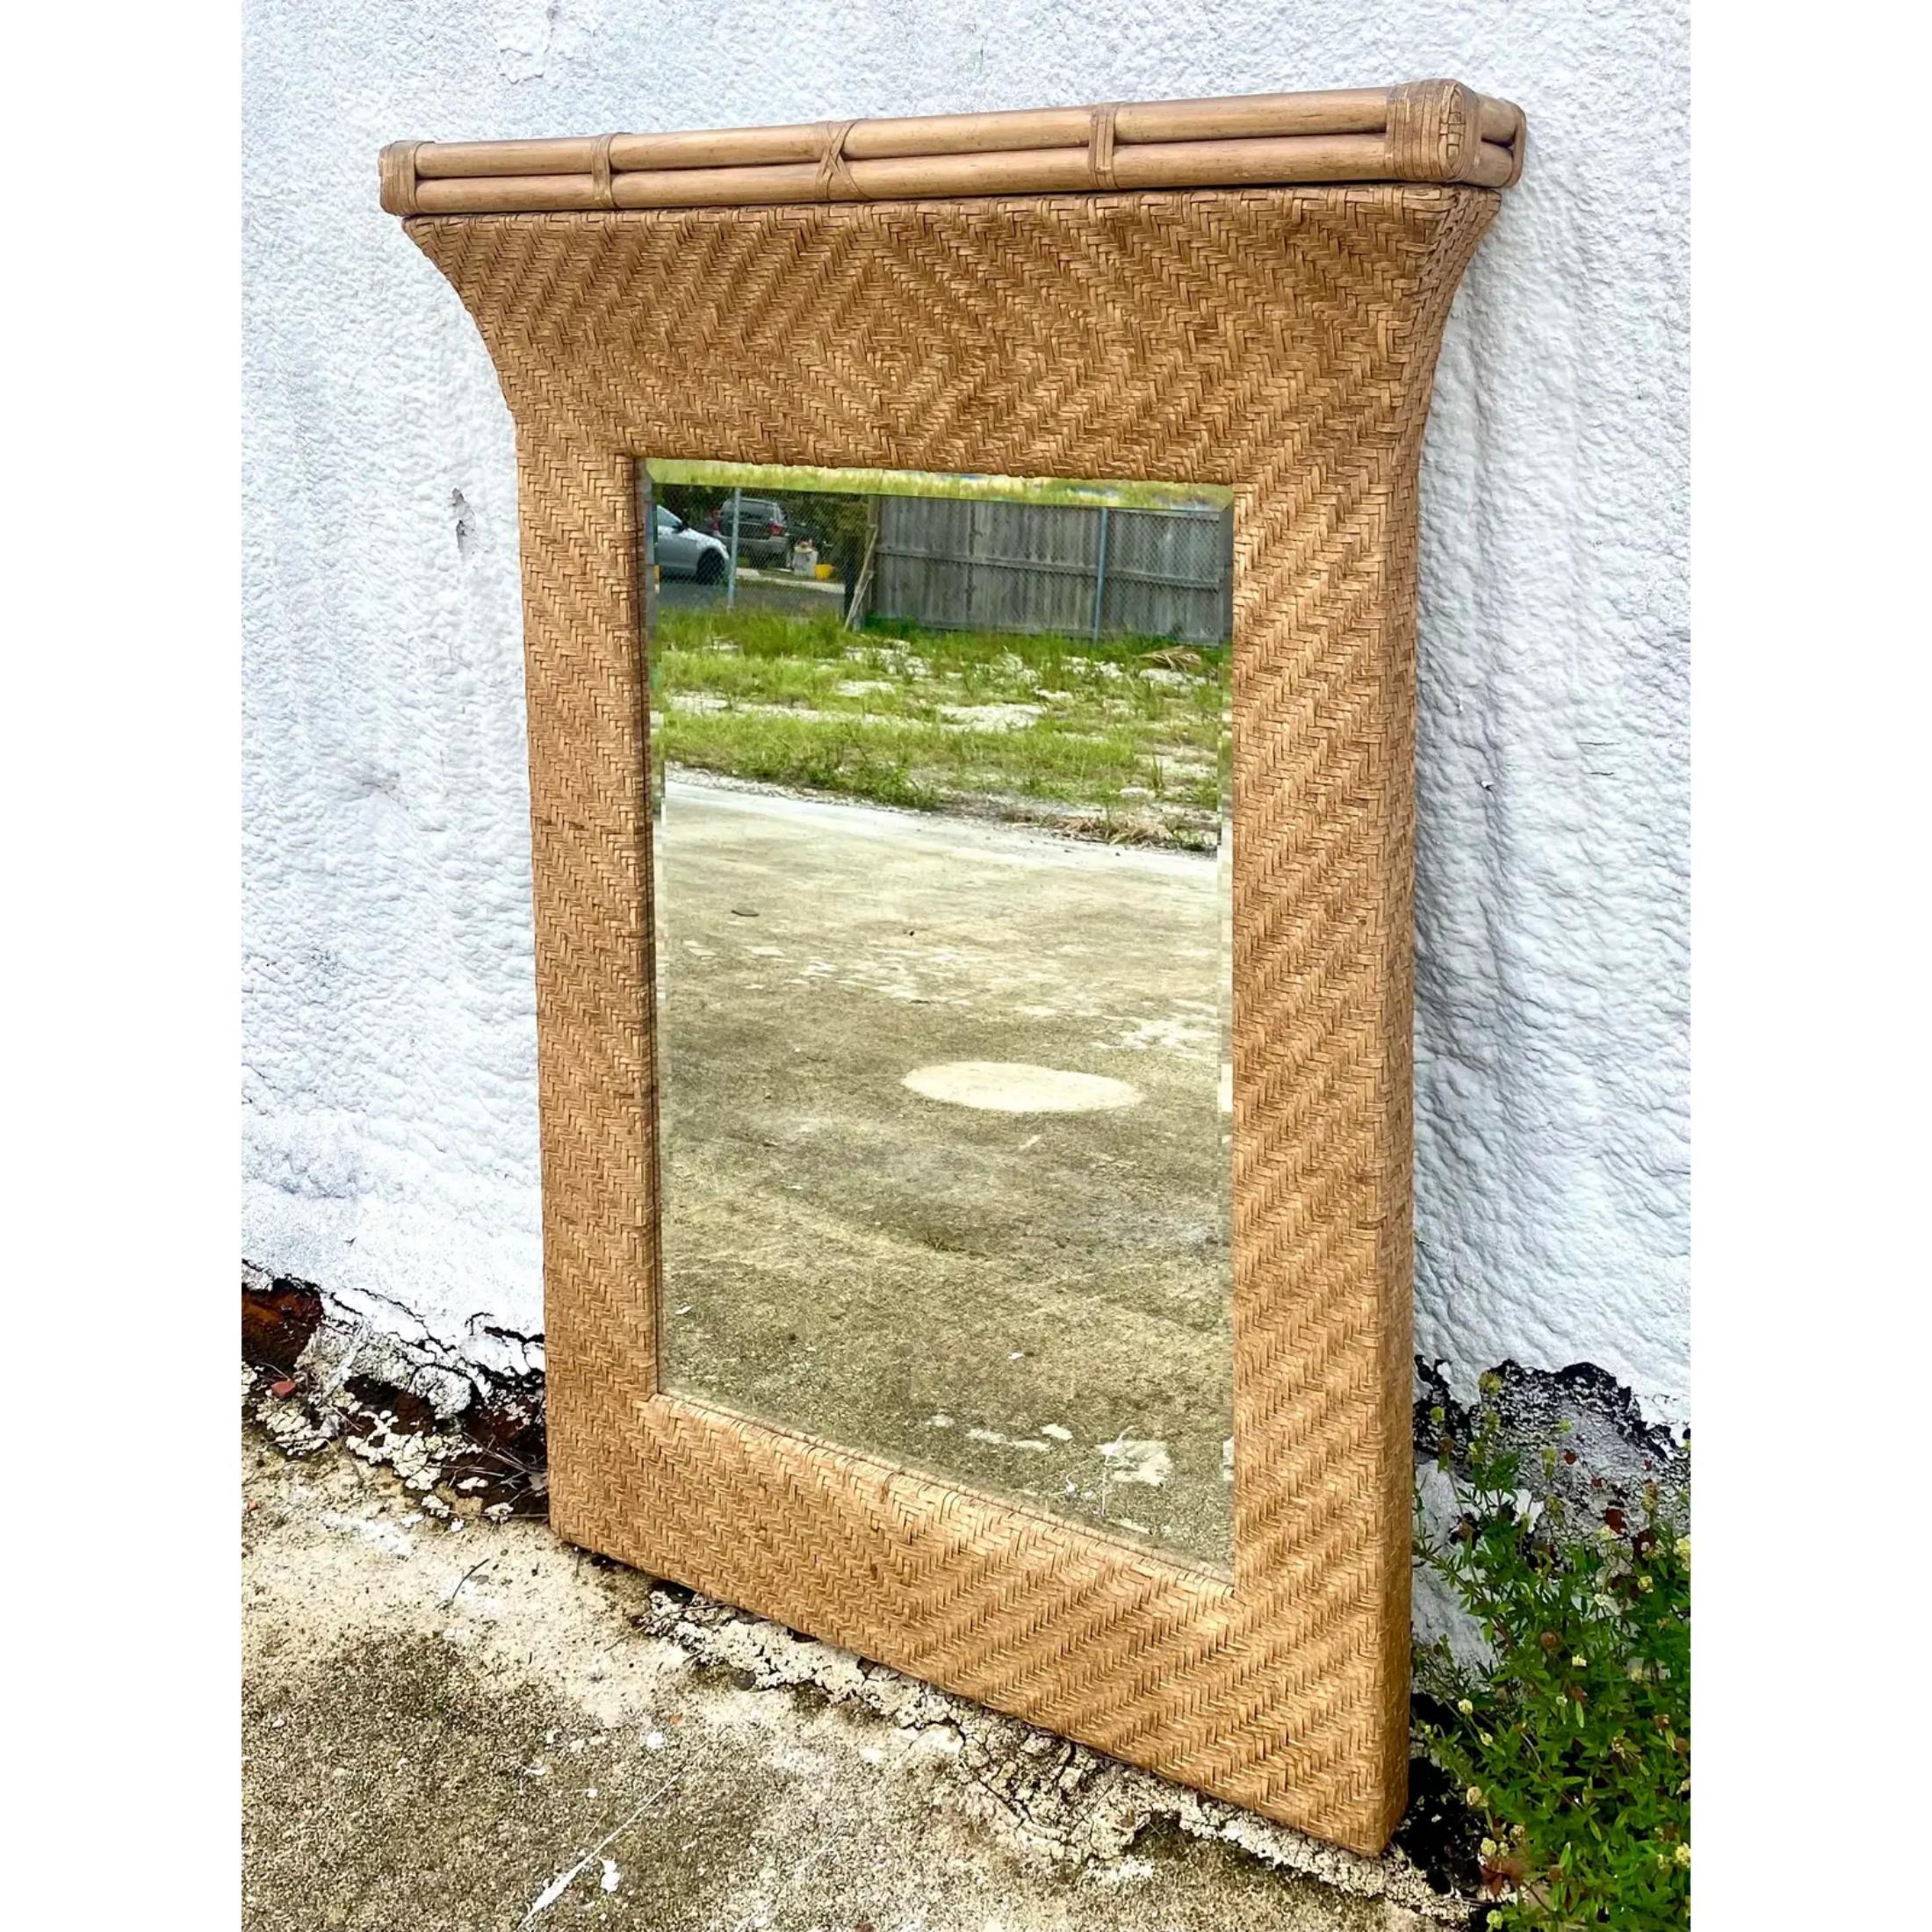 Incredible Henredon Coastal mirror. Made from a beautiful woven leather and trimmed in thick bamboo. A flared top and grand size. An impressive addition to any room